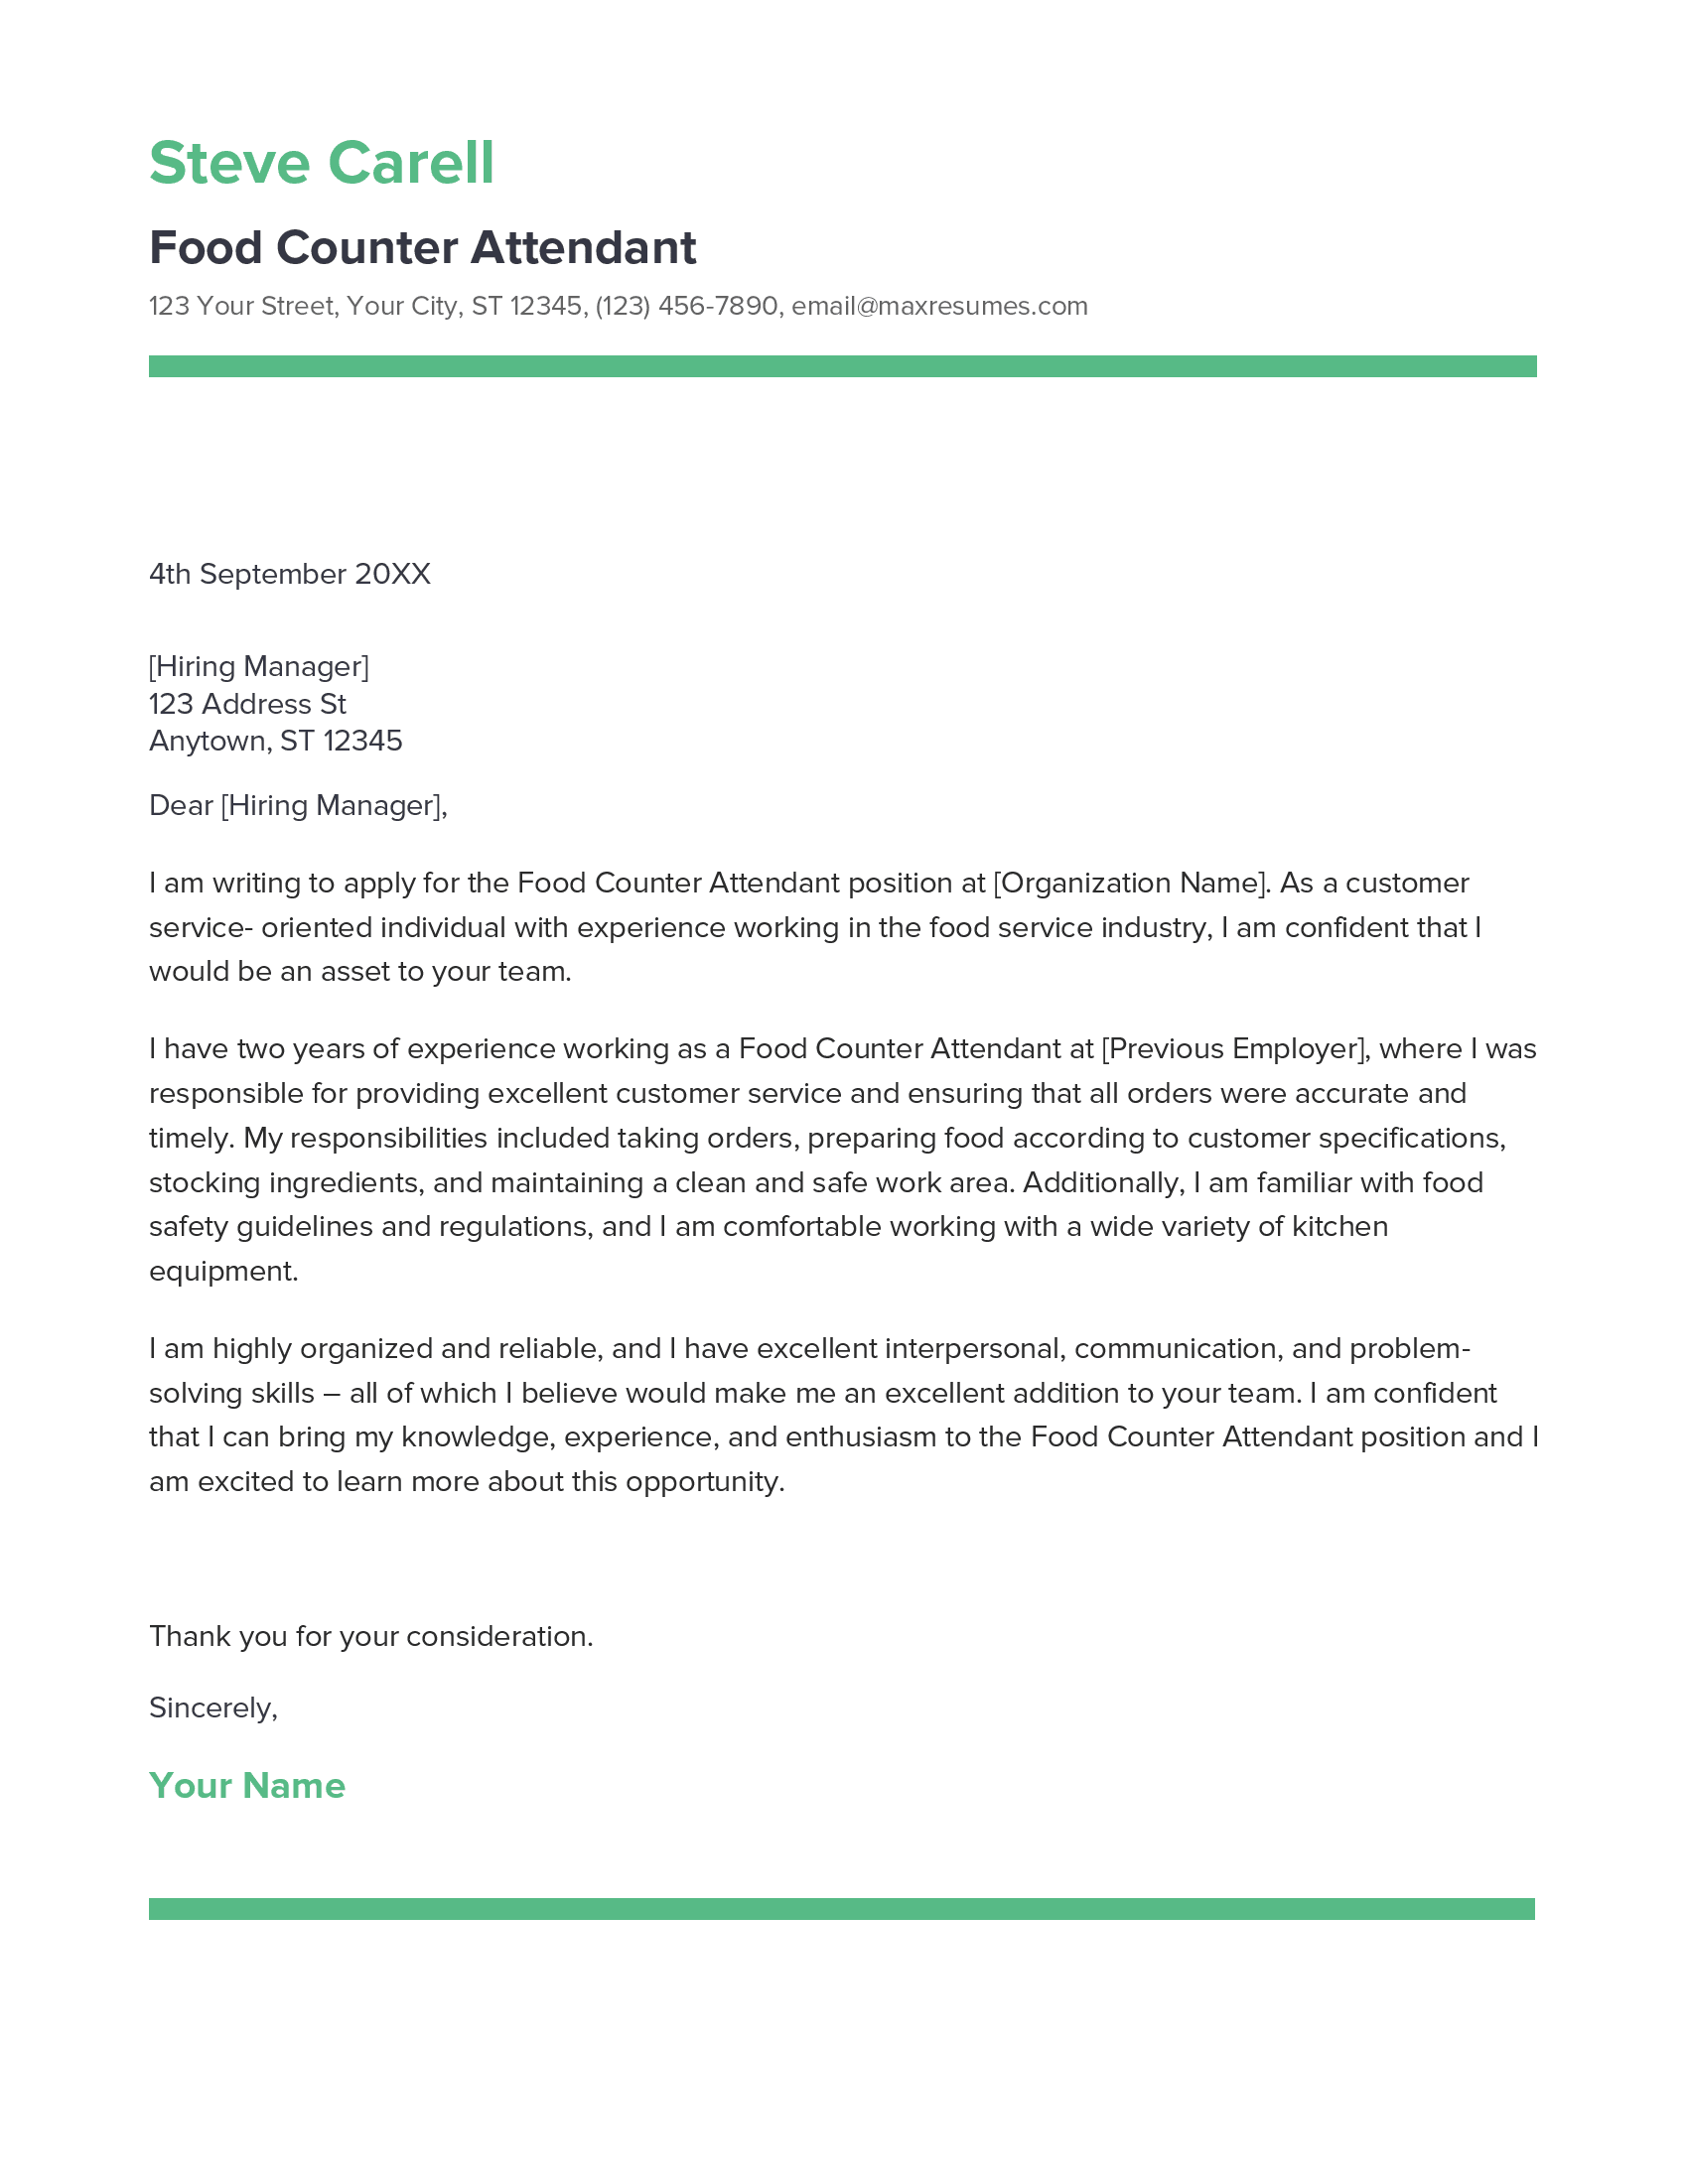 Food Counter Attendant Cover Letter Example